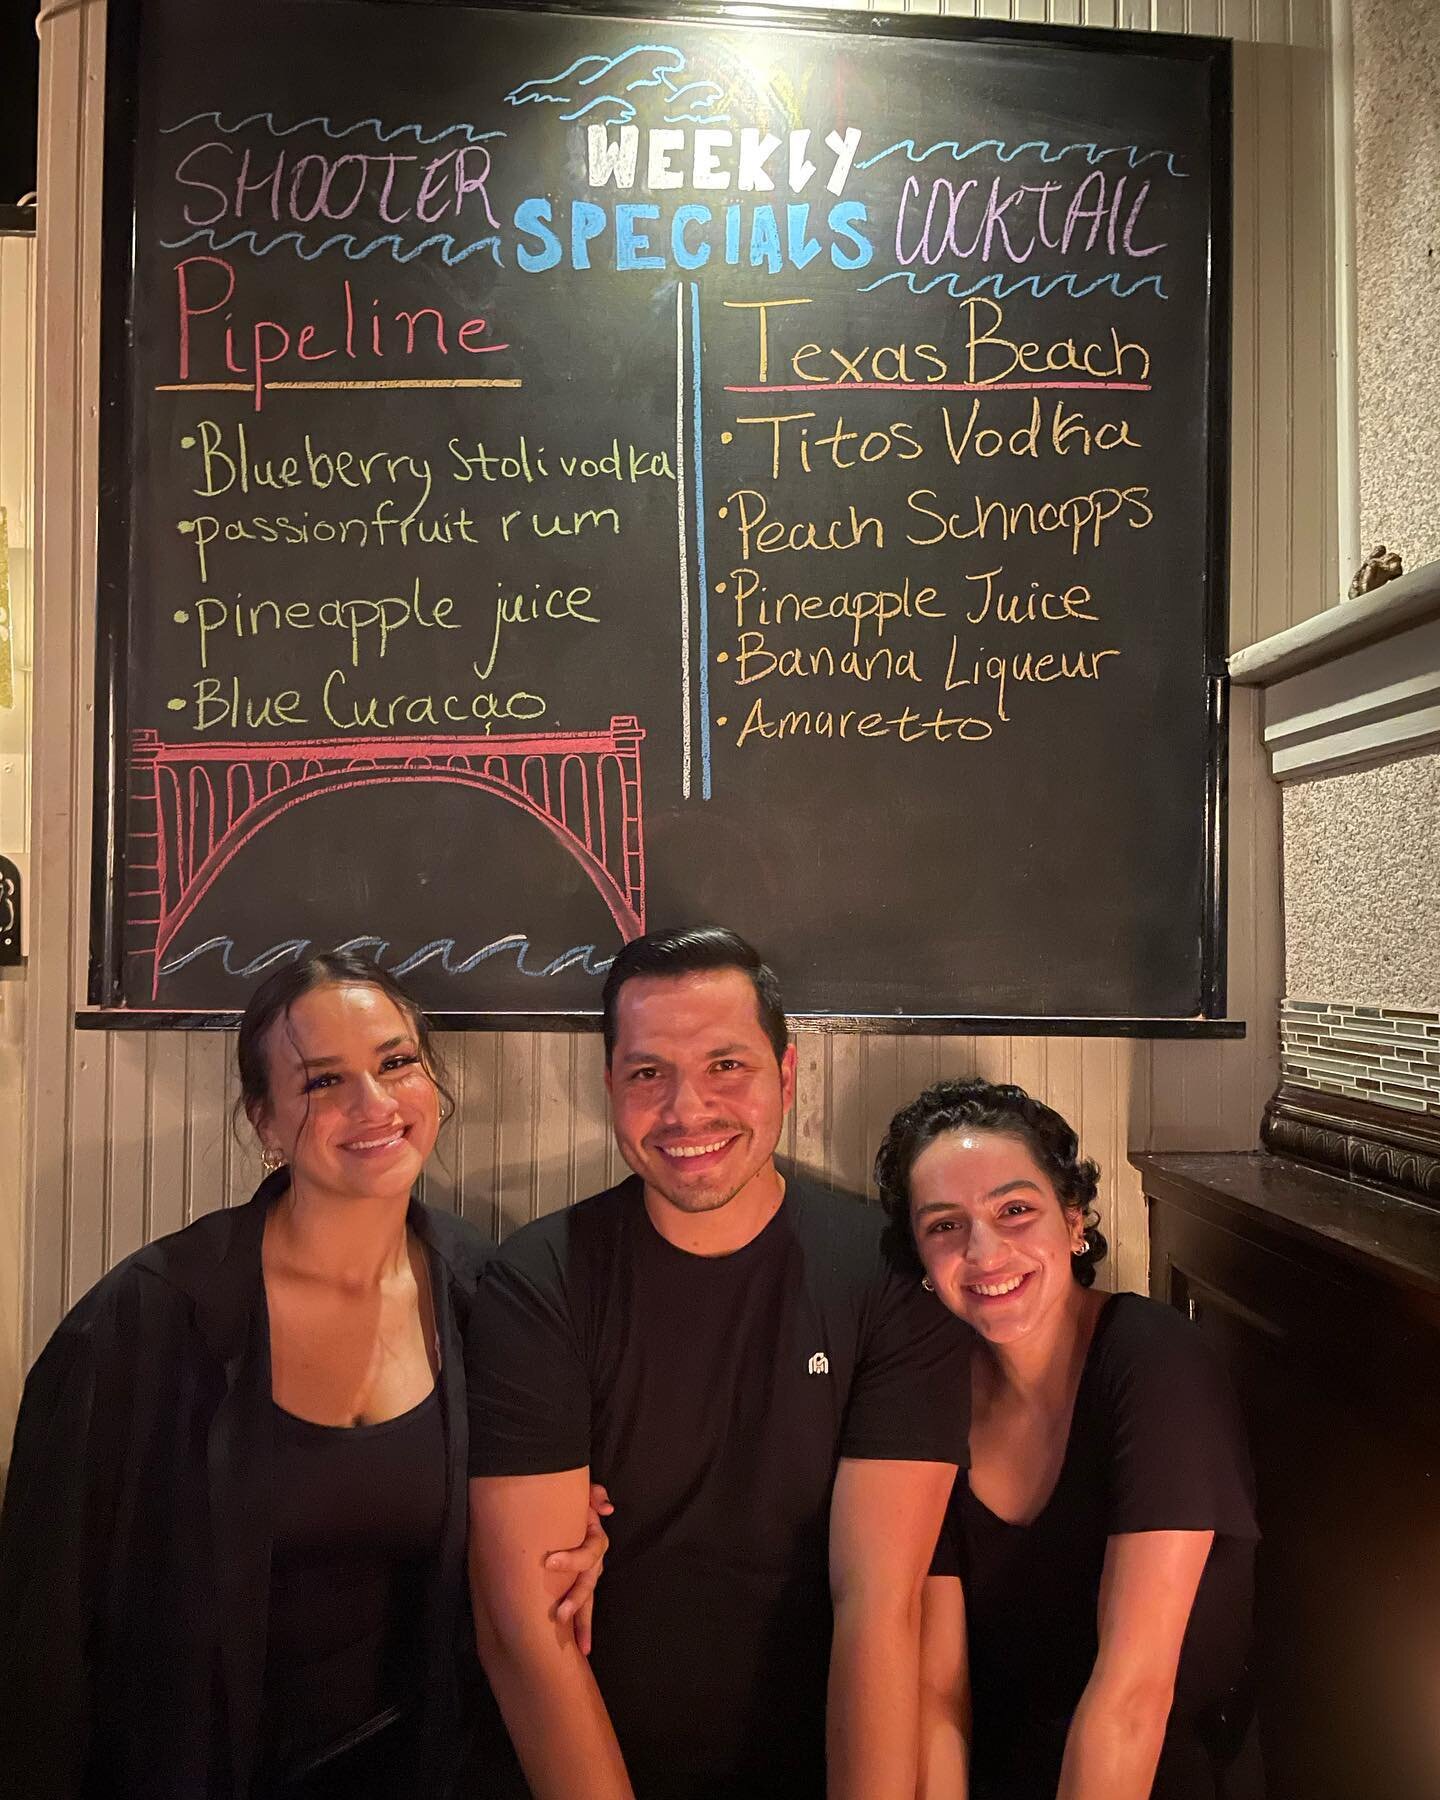 Our new cocktail and shooter specials!